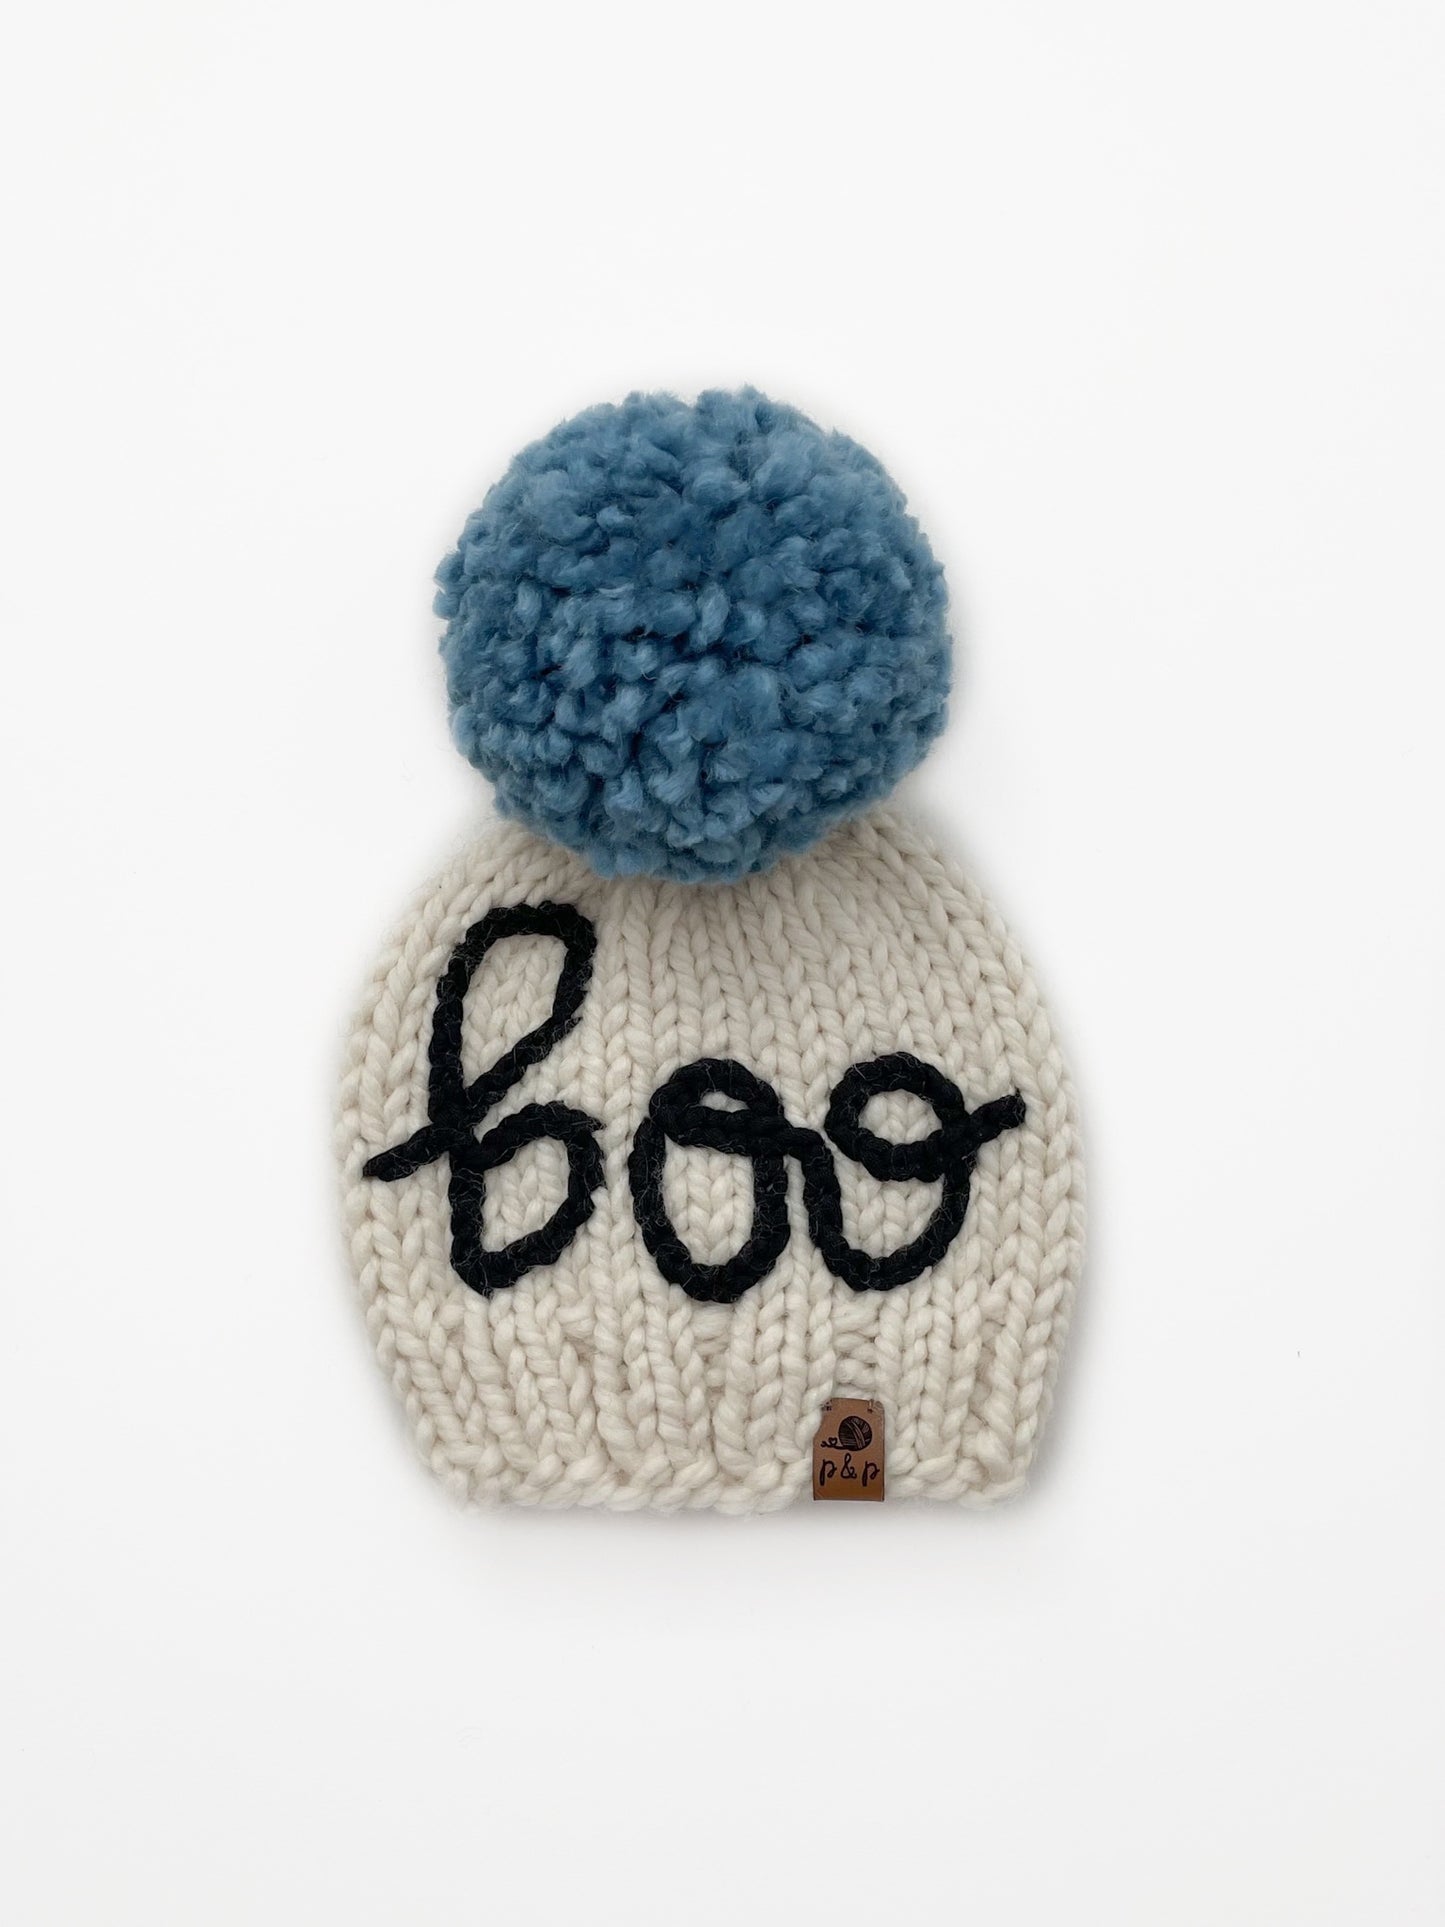 Embroidered Boo Hat